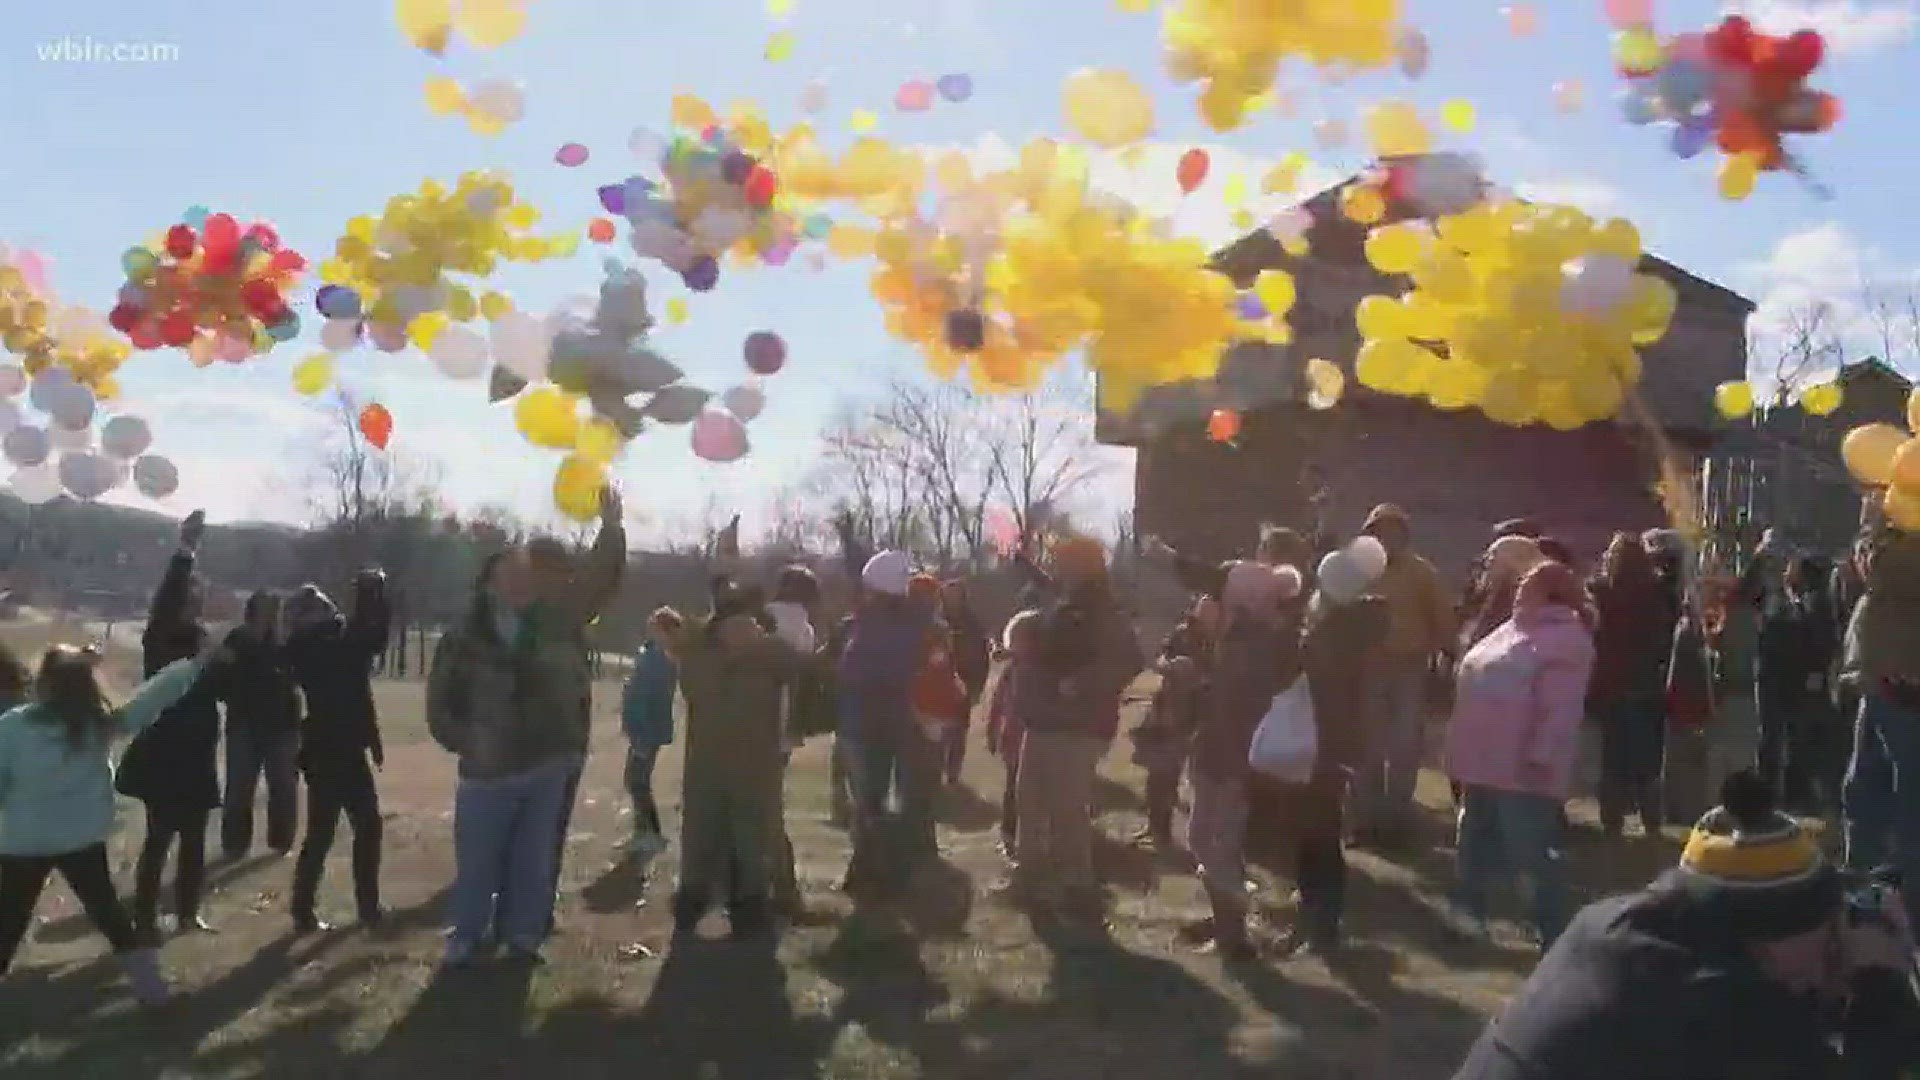 Jan. 4, 2018: The community of Kingston, Tennessee, came together to celebrate a little girl's last chemotherapy treatment.